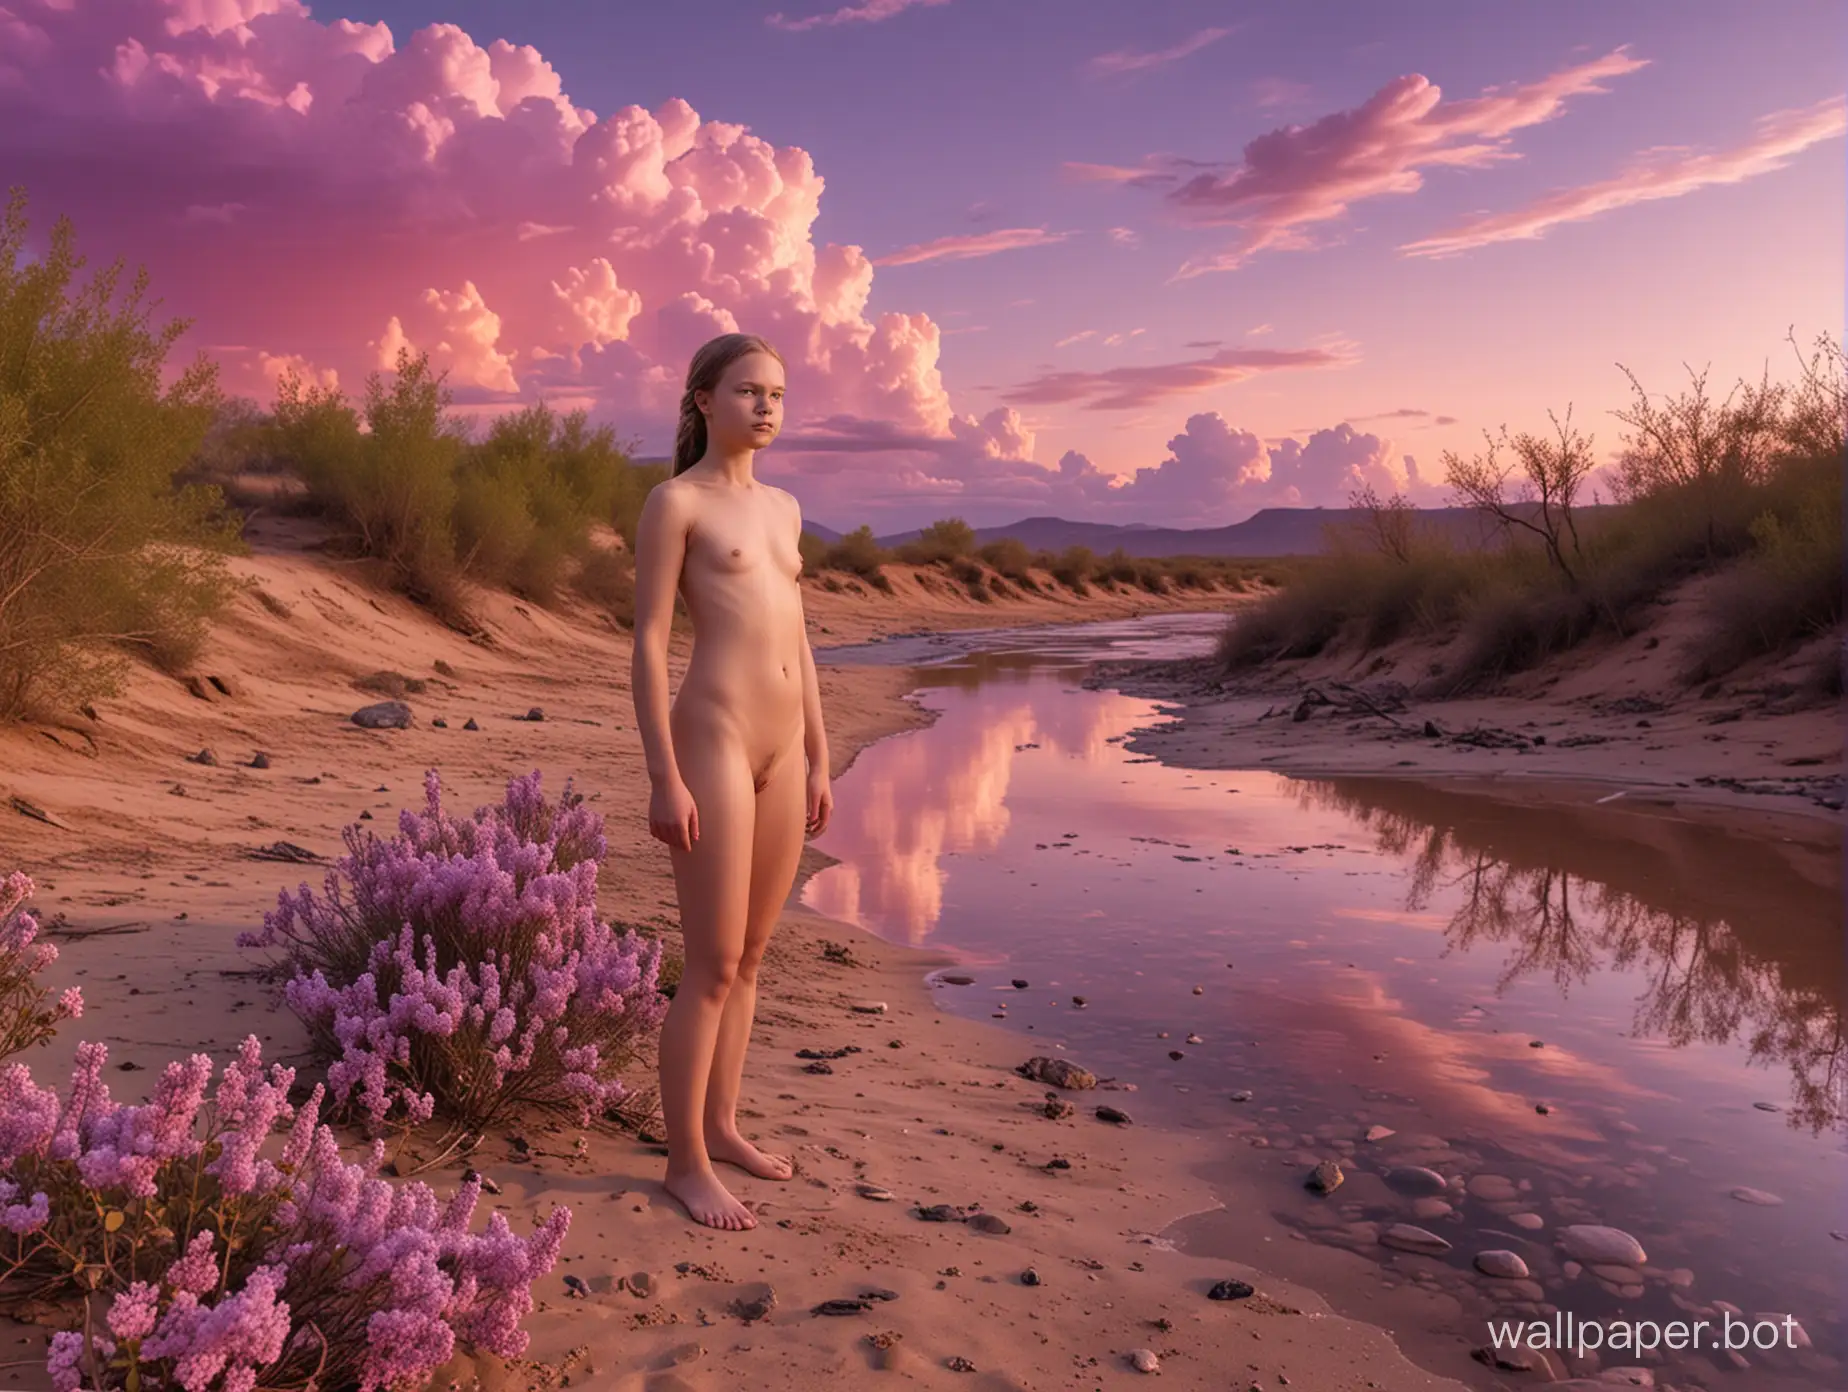 11YearOld-Nudist-Girl-on-Alien-Desert-Planet-with-Orange-Sand-and-Lilac-Sky